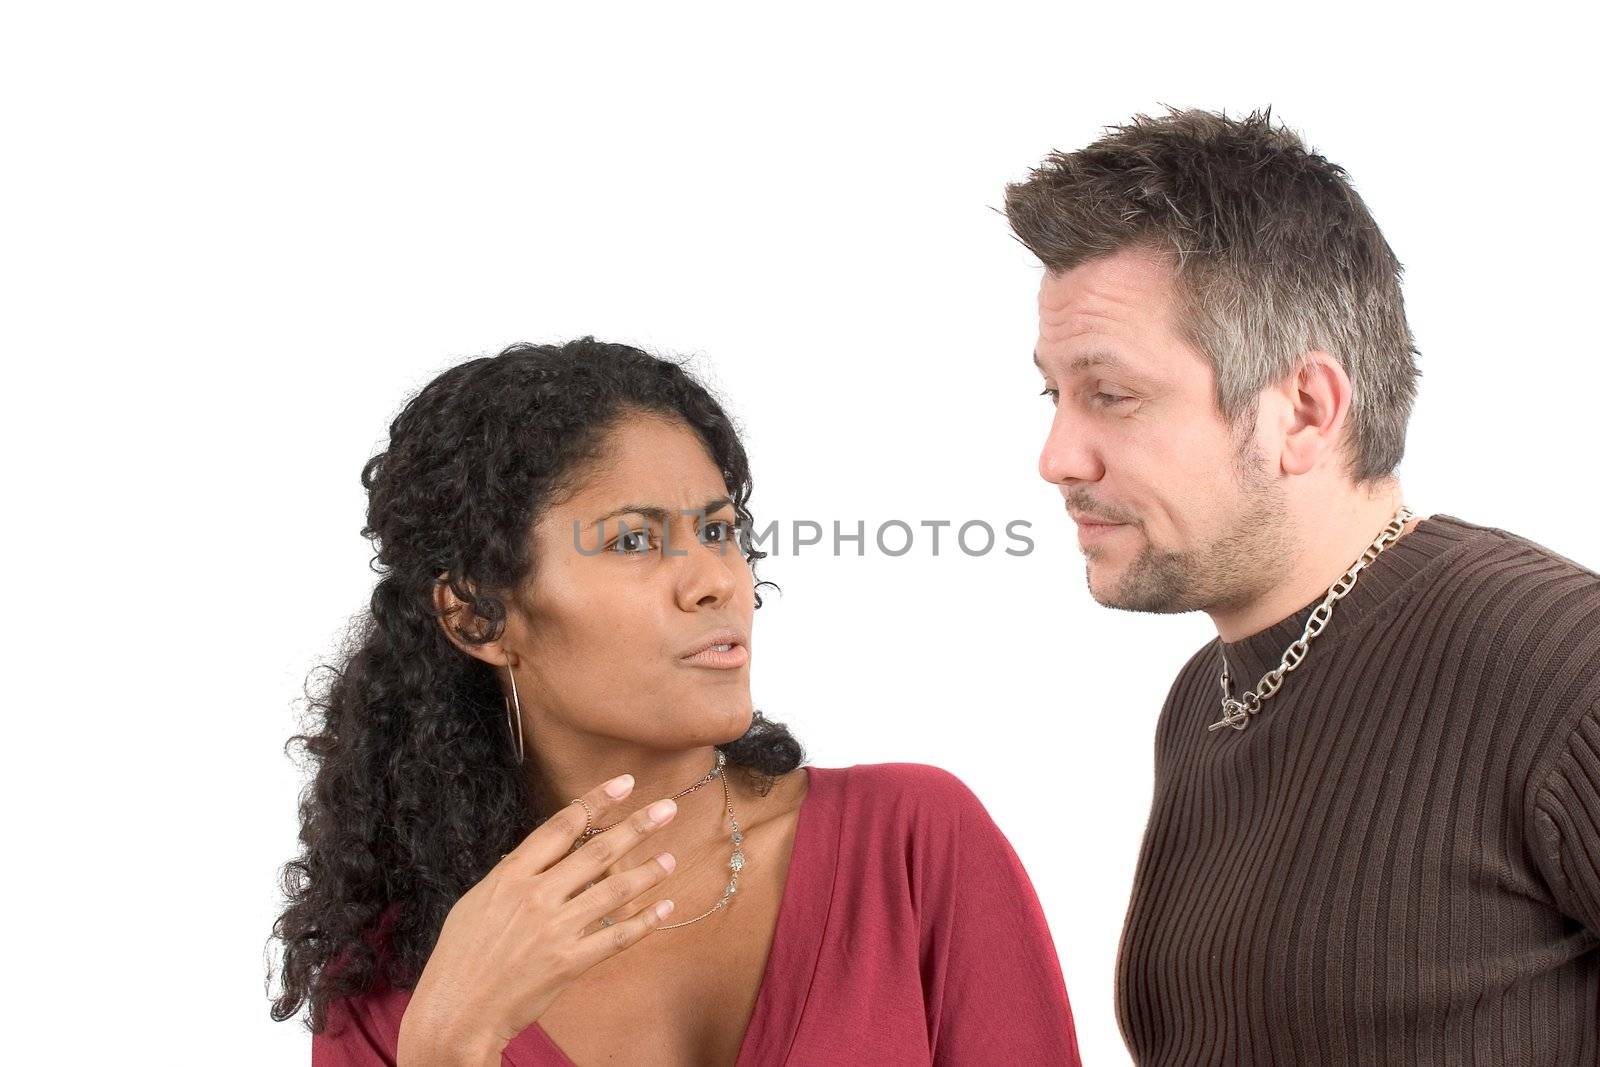 Woman is looking angry while they are having a discussion